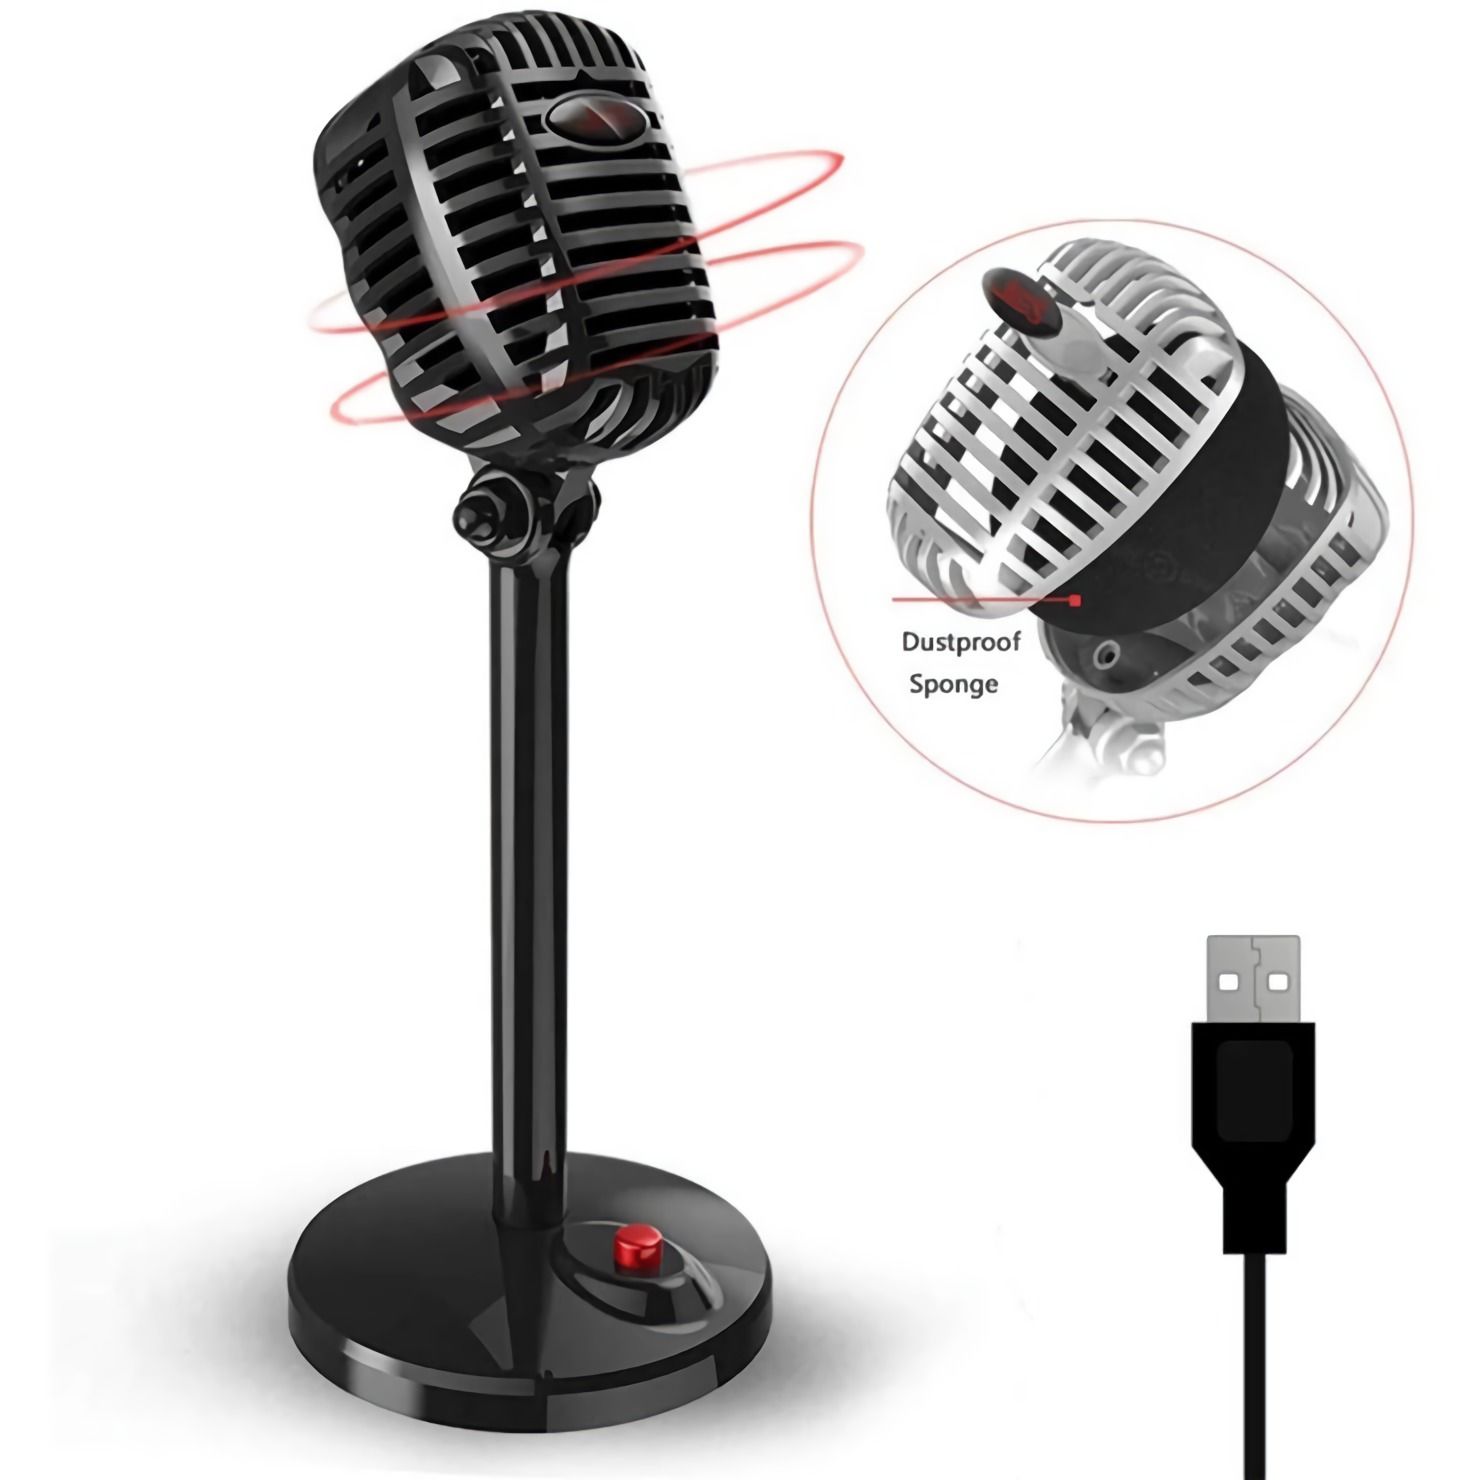 Docooler-JIES-Microphone-Wired-Mic-USB-Port-Game-Singing-Mic-for-PC-Computer-With-Sound-Card-1665966